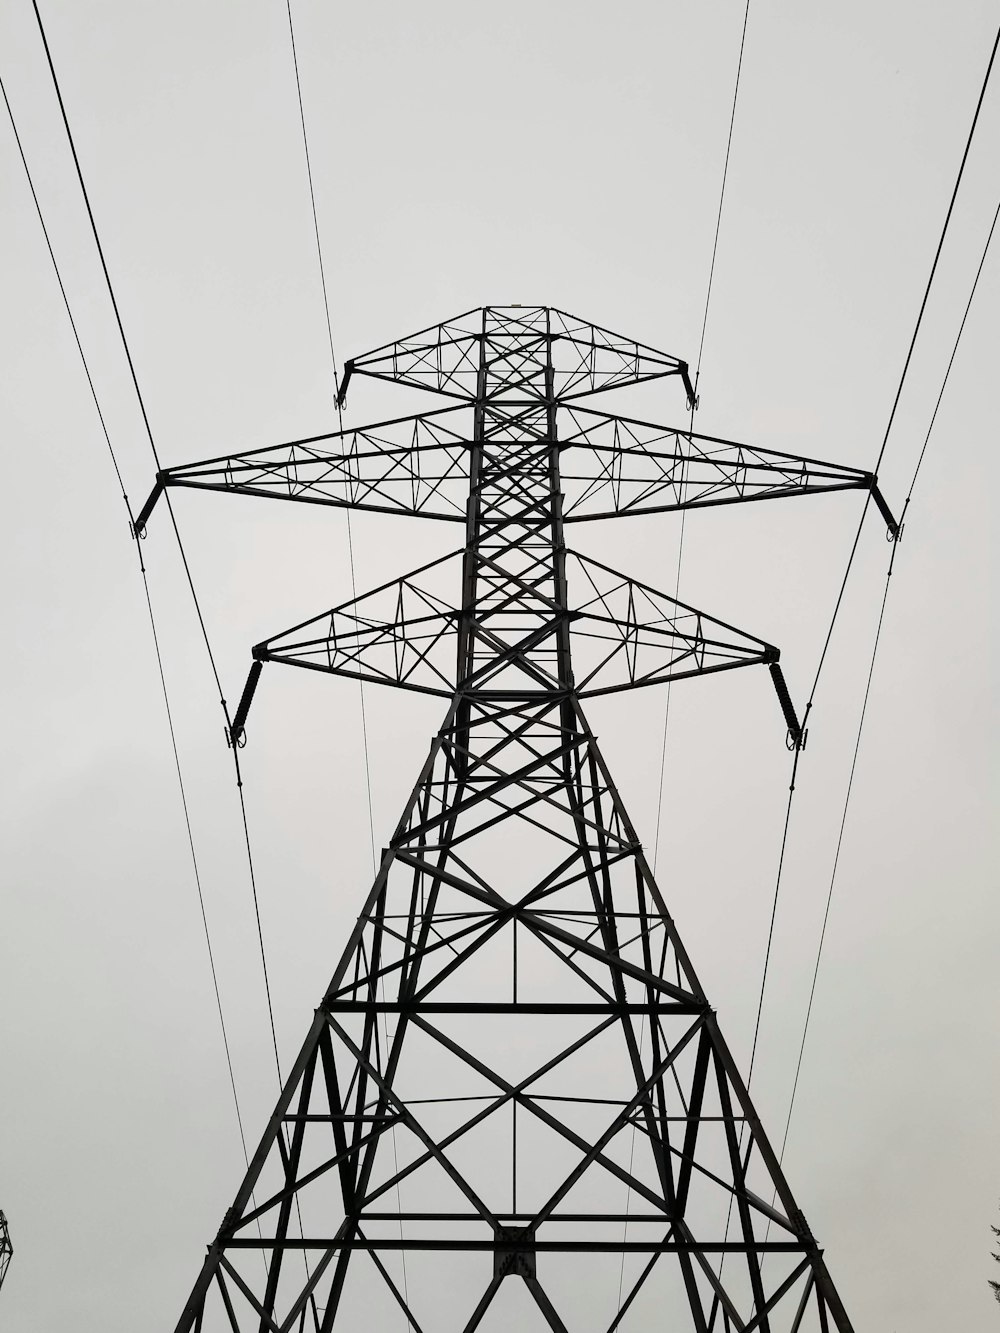 a tall tower with lots of power lines above it